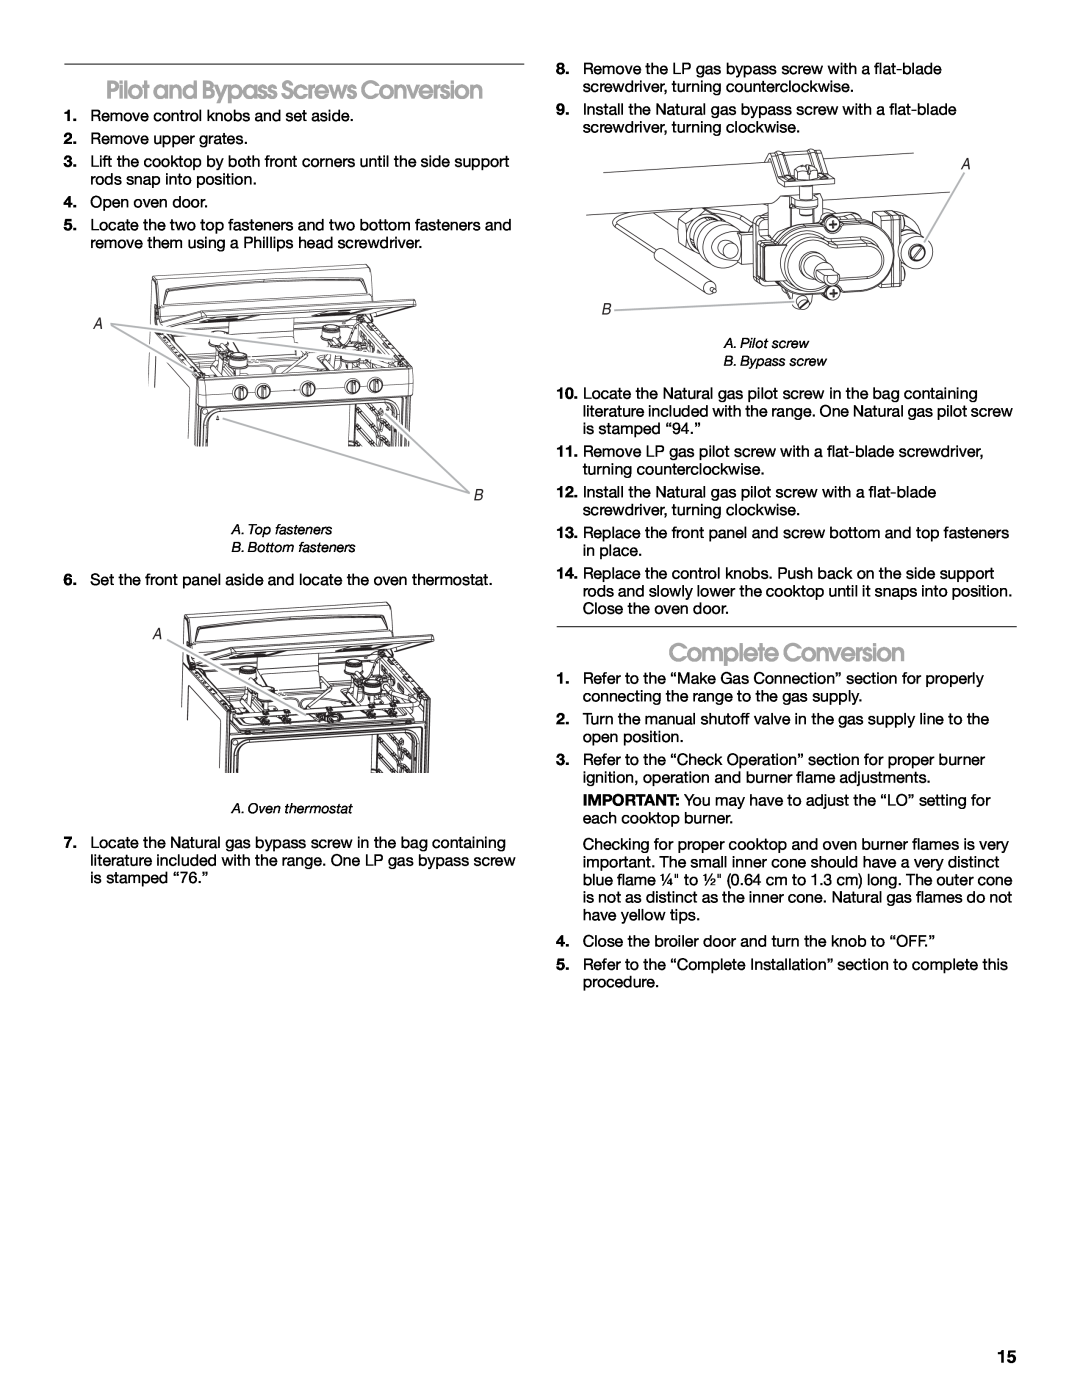 Whirlpool W10325493A installation instructions Pilot and Bypass Screws Conversion, Complete Conversion 